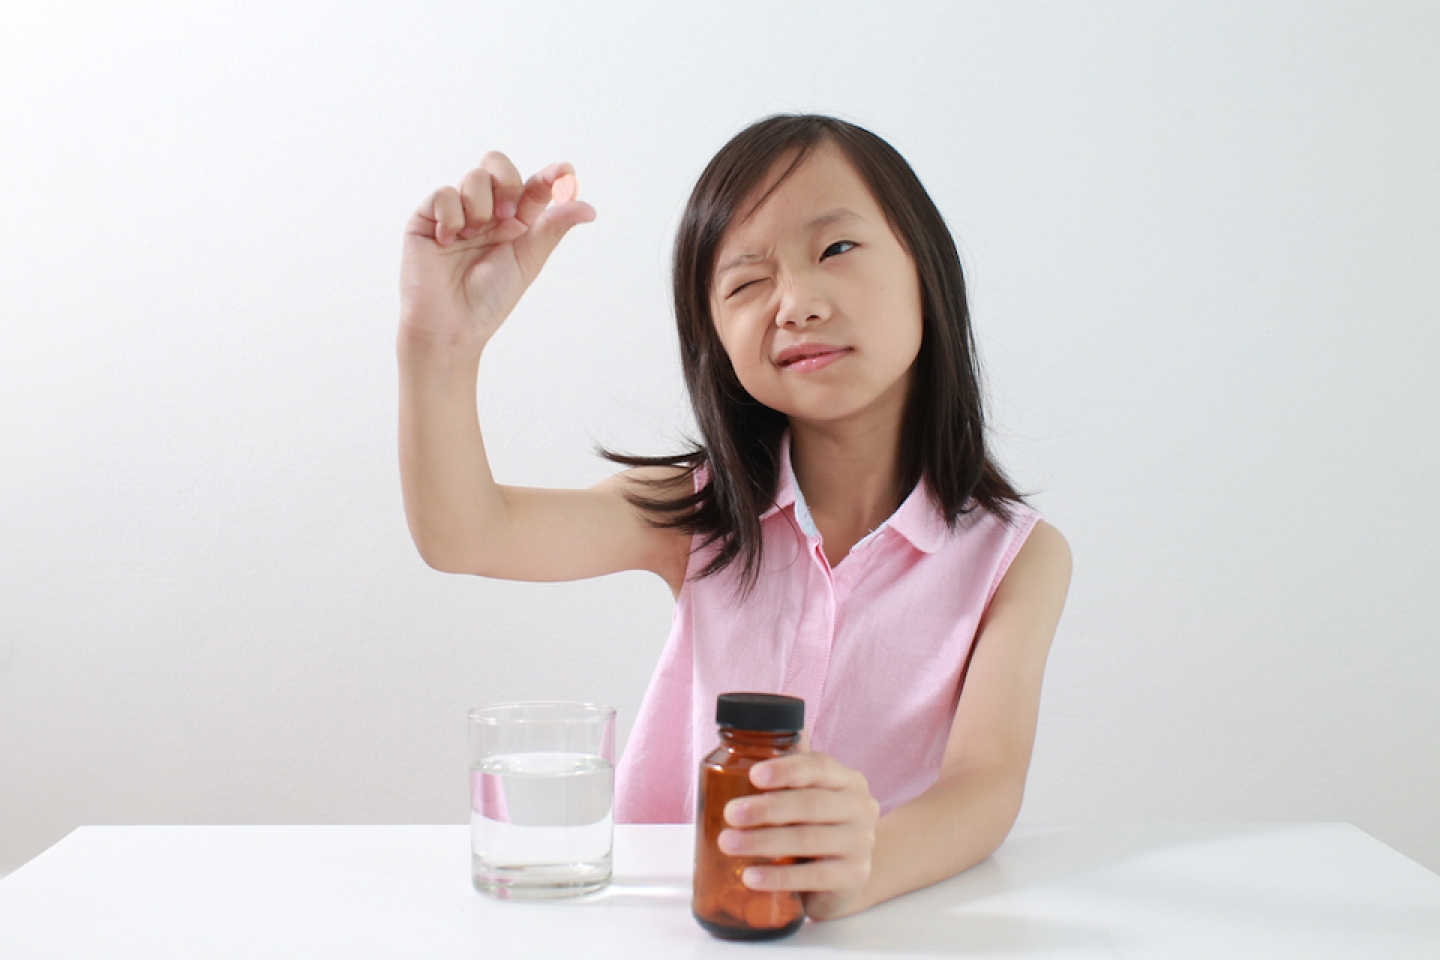 young girl with a vitamin in her hand